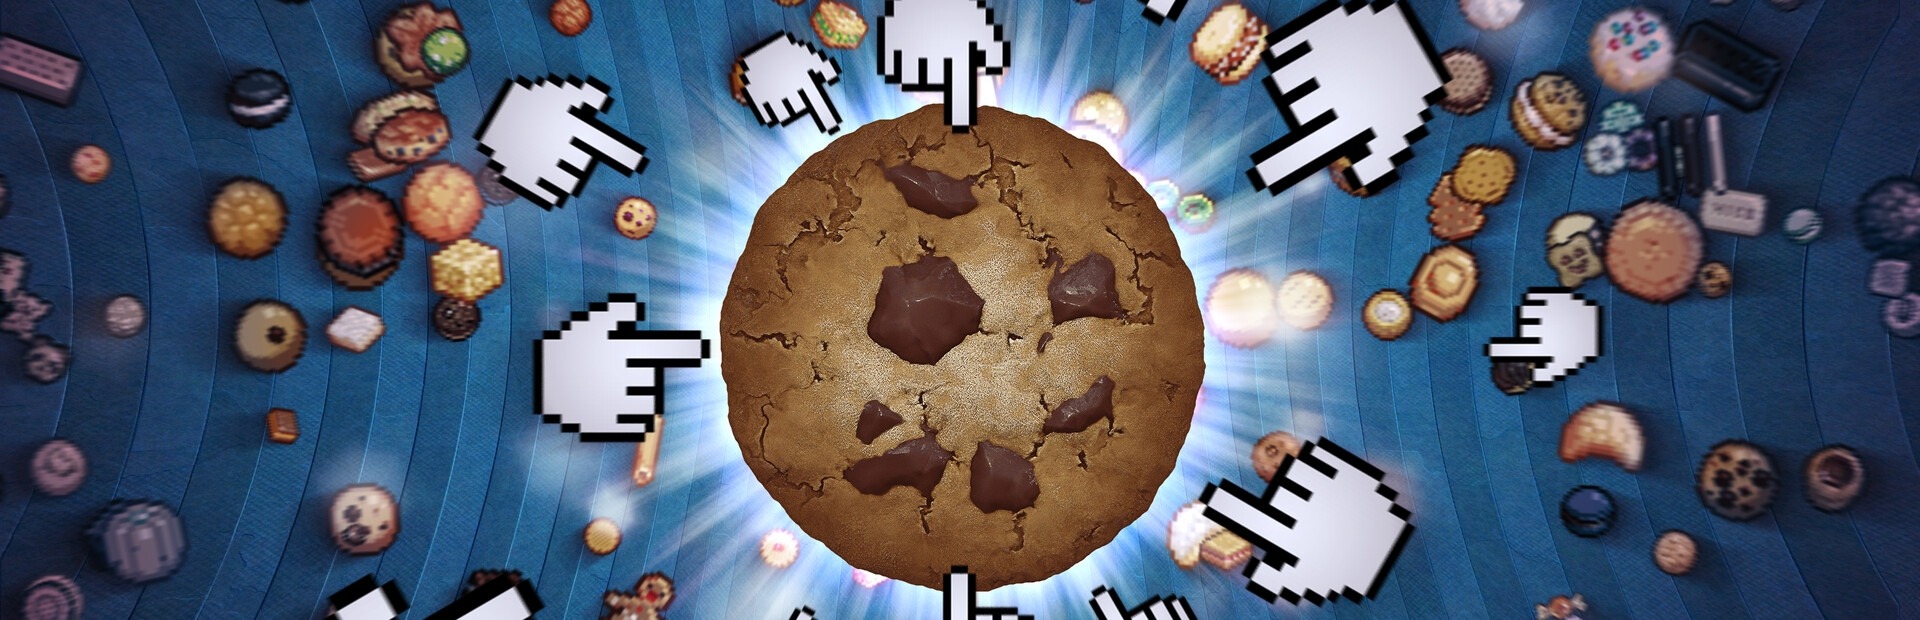 Cookie clicker console steam фото 51